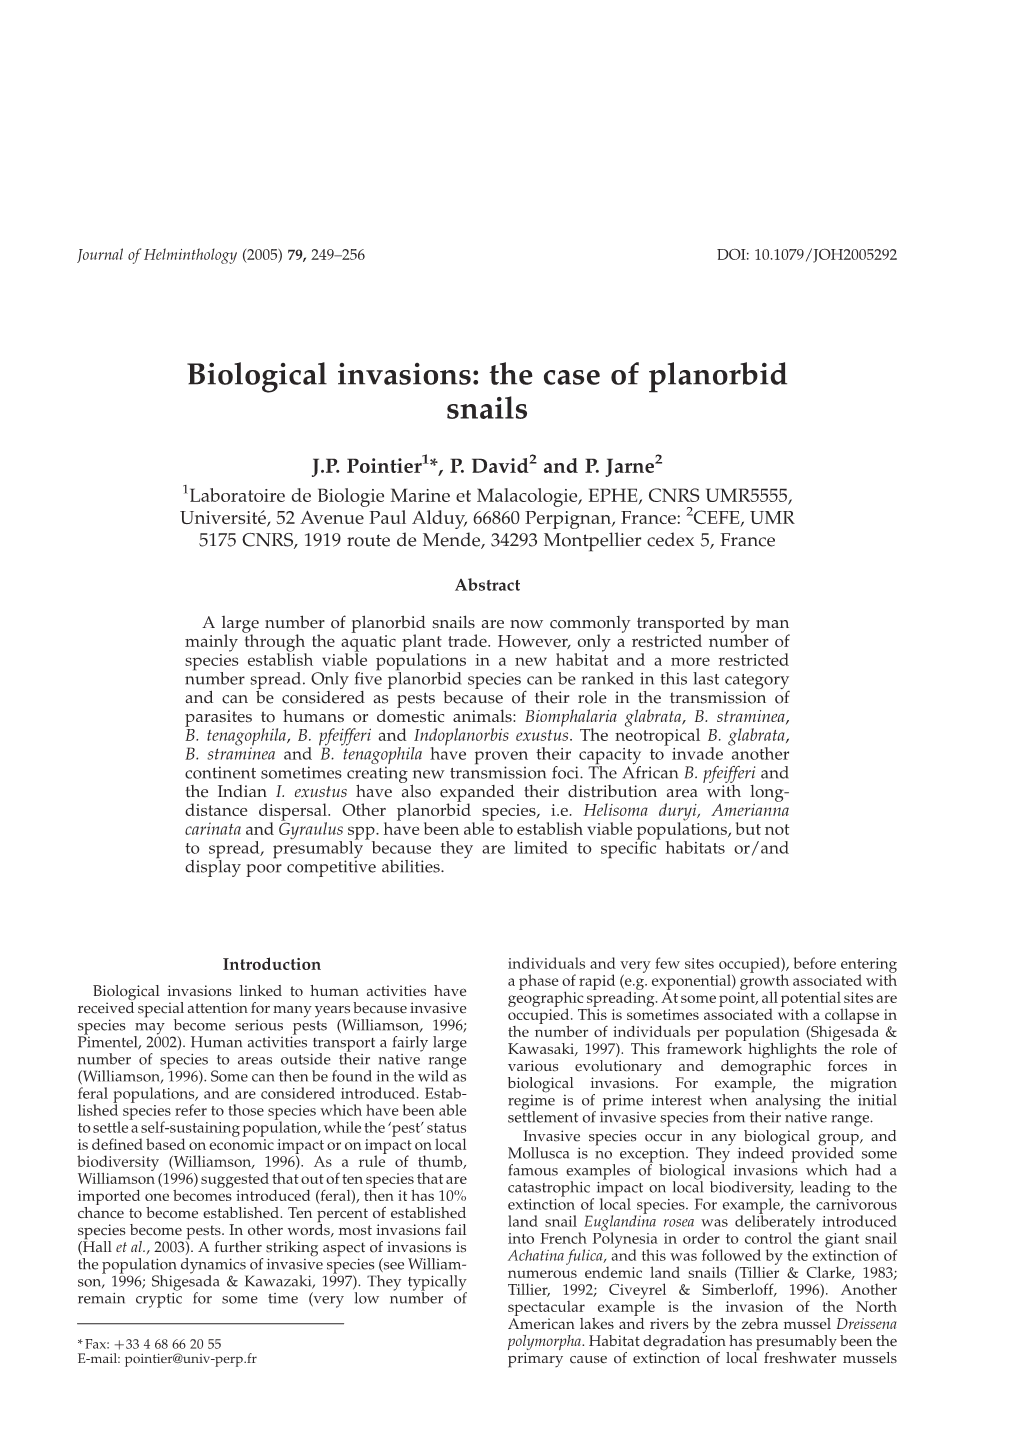 The Case of Planorbid Snails